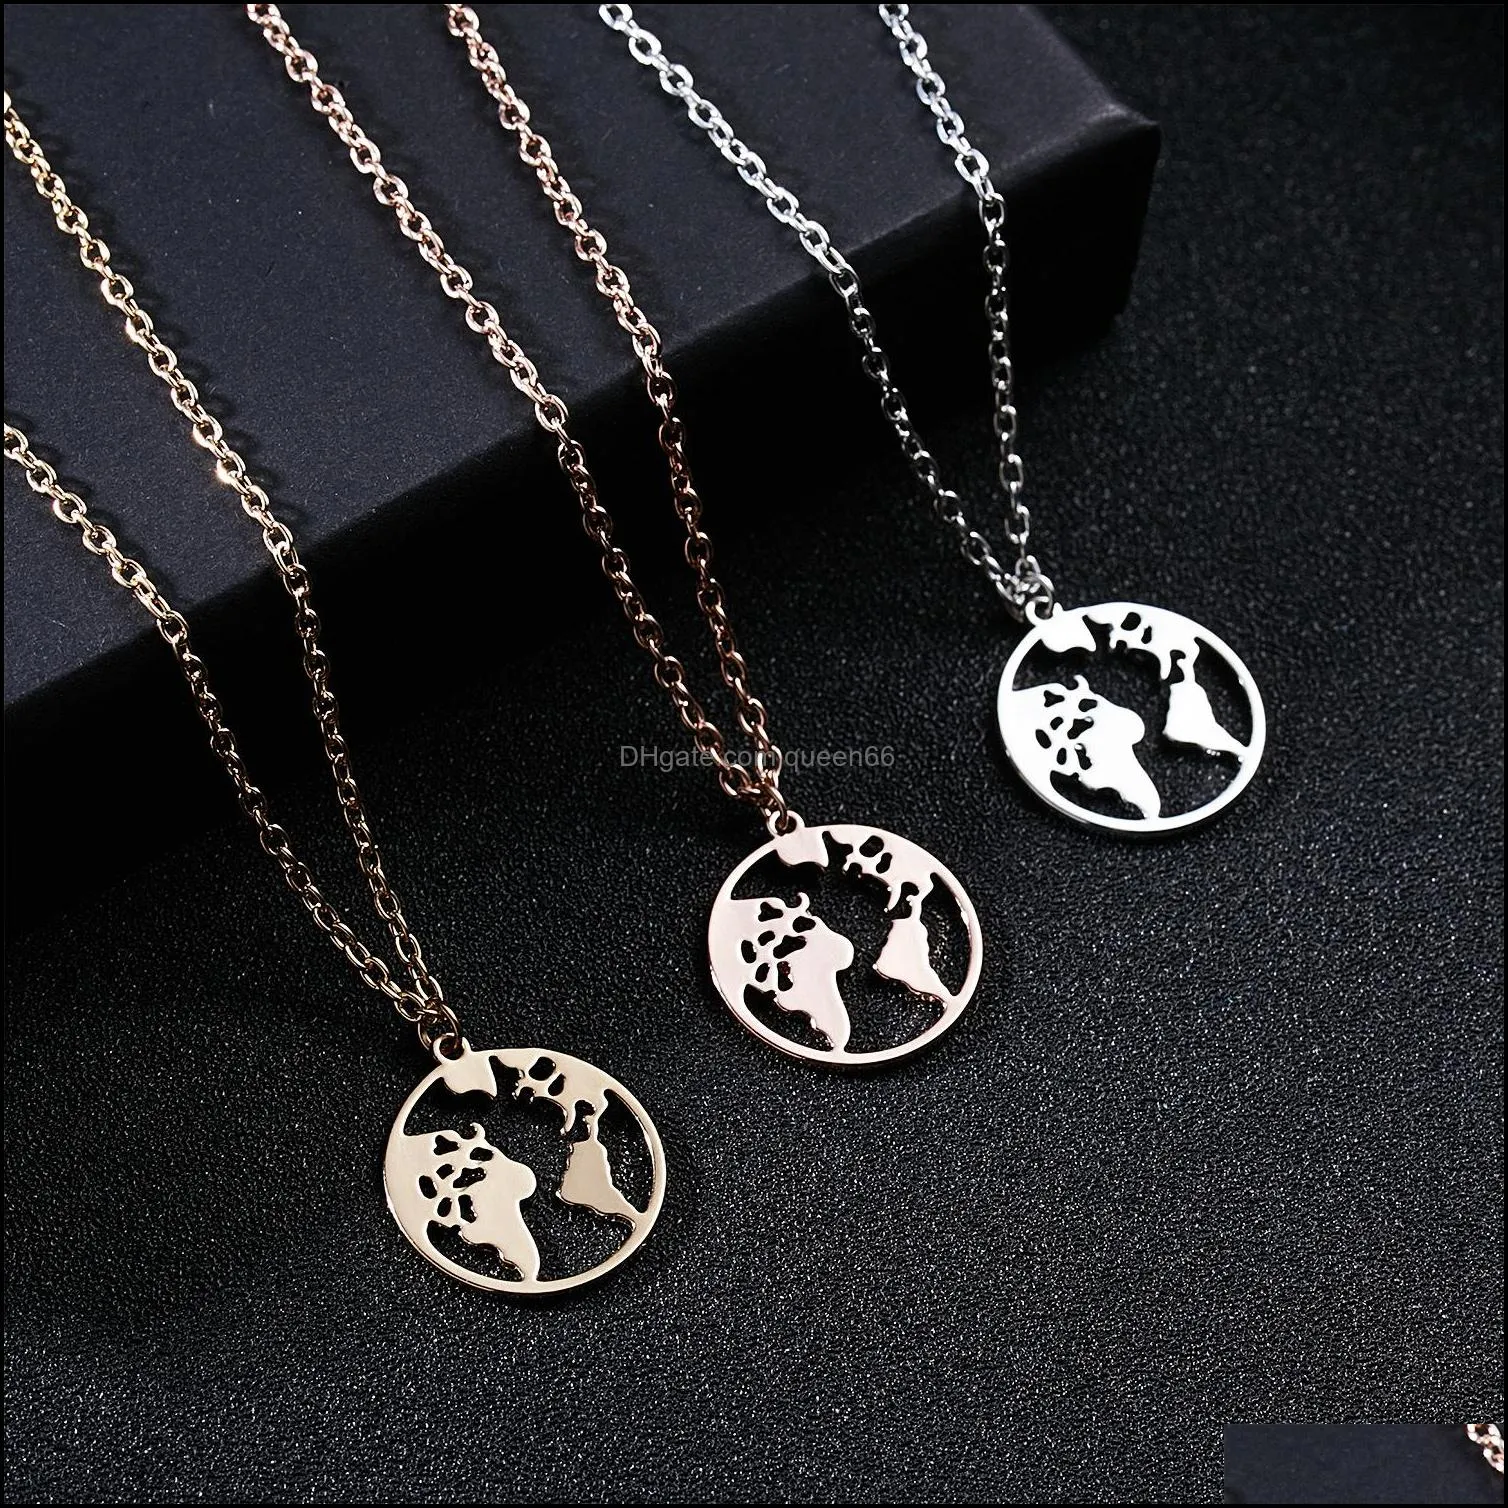 hollow world map necklace women silver color chain earth global pattern pendant fashion girls party jewelry gift choker